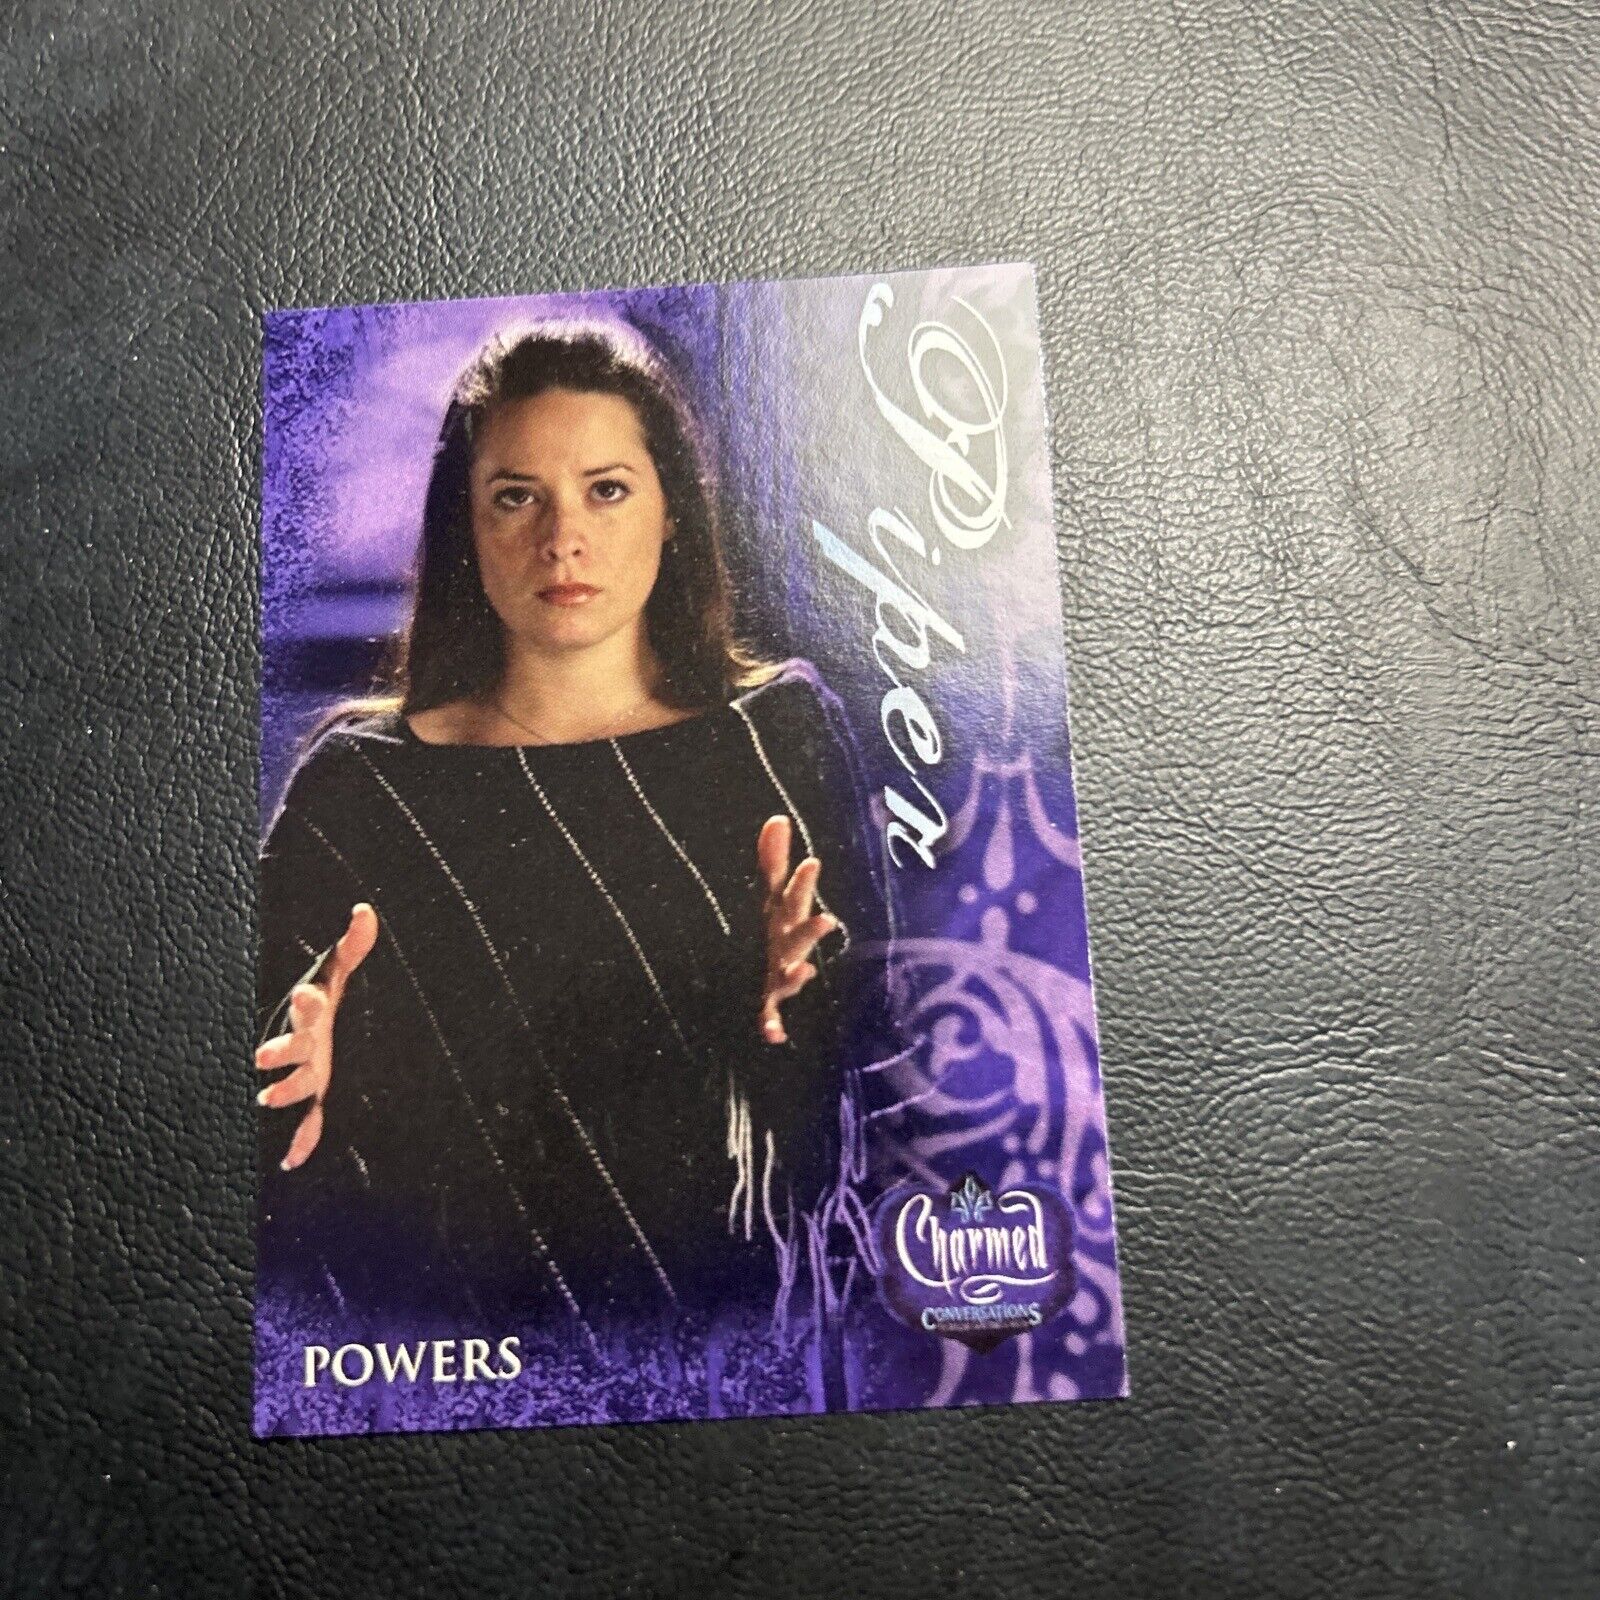 55a Charmed Conversations 2005 #3 Piper Halliwell Holly Marie Combs